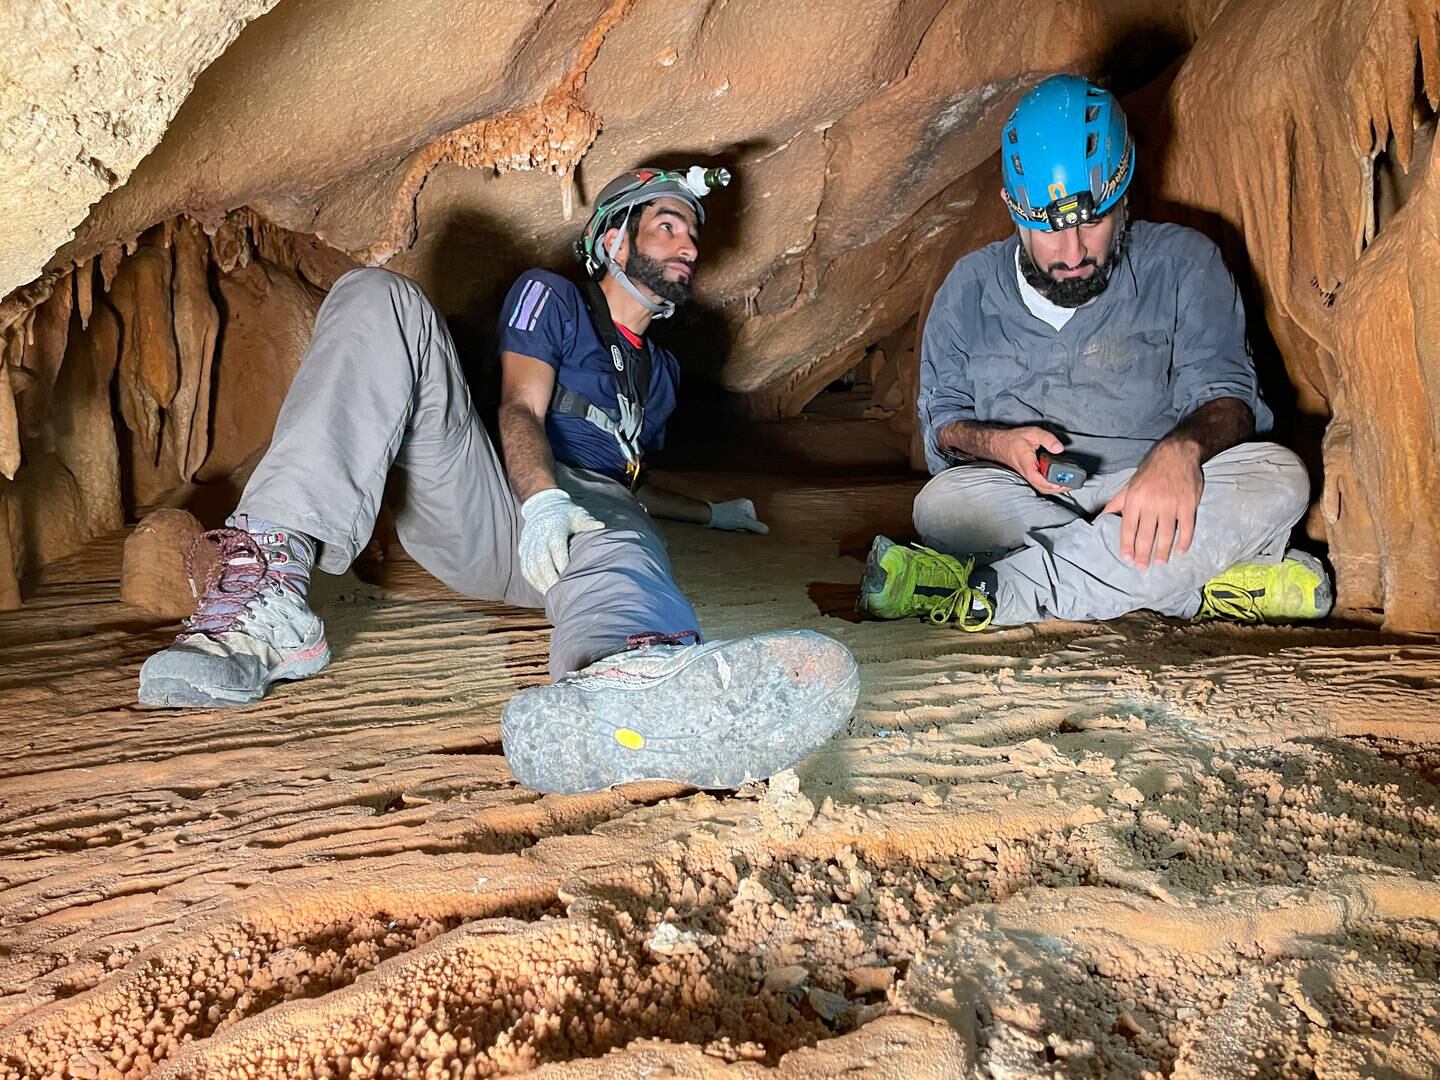 Omani cavers explore in the country's Jebel Akhdar area. It is honeycombed with caves created by limestone erosion. Photo: Nabil Alsaqri